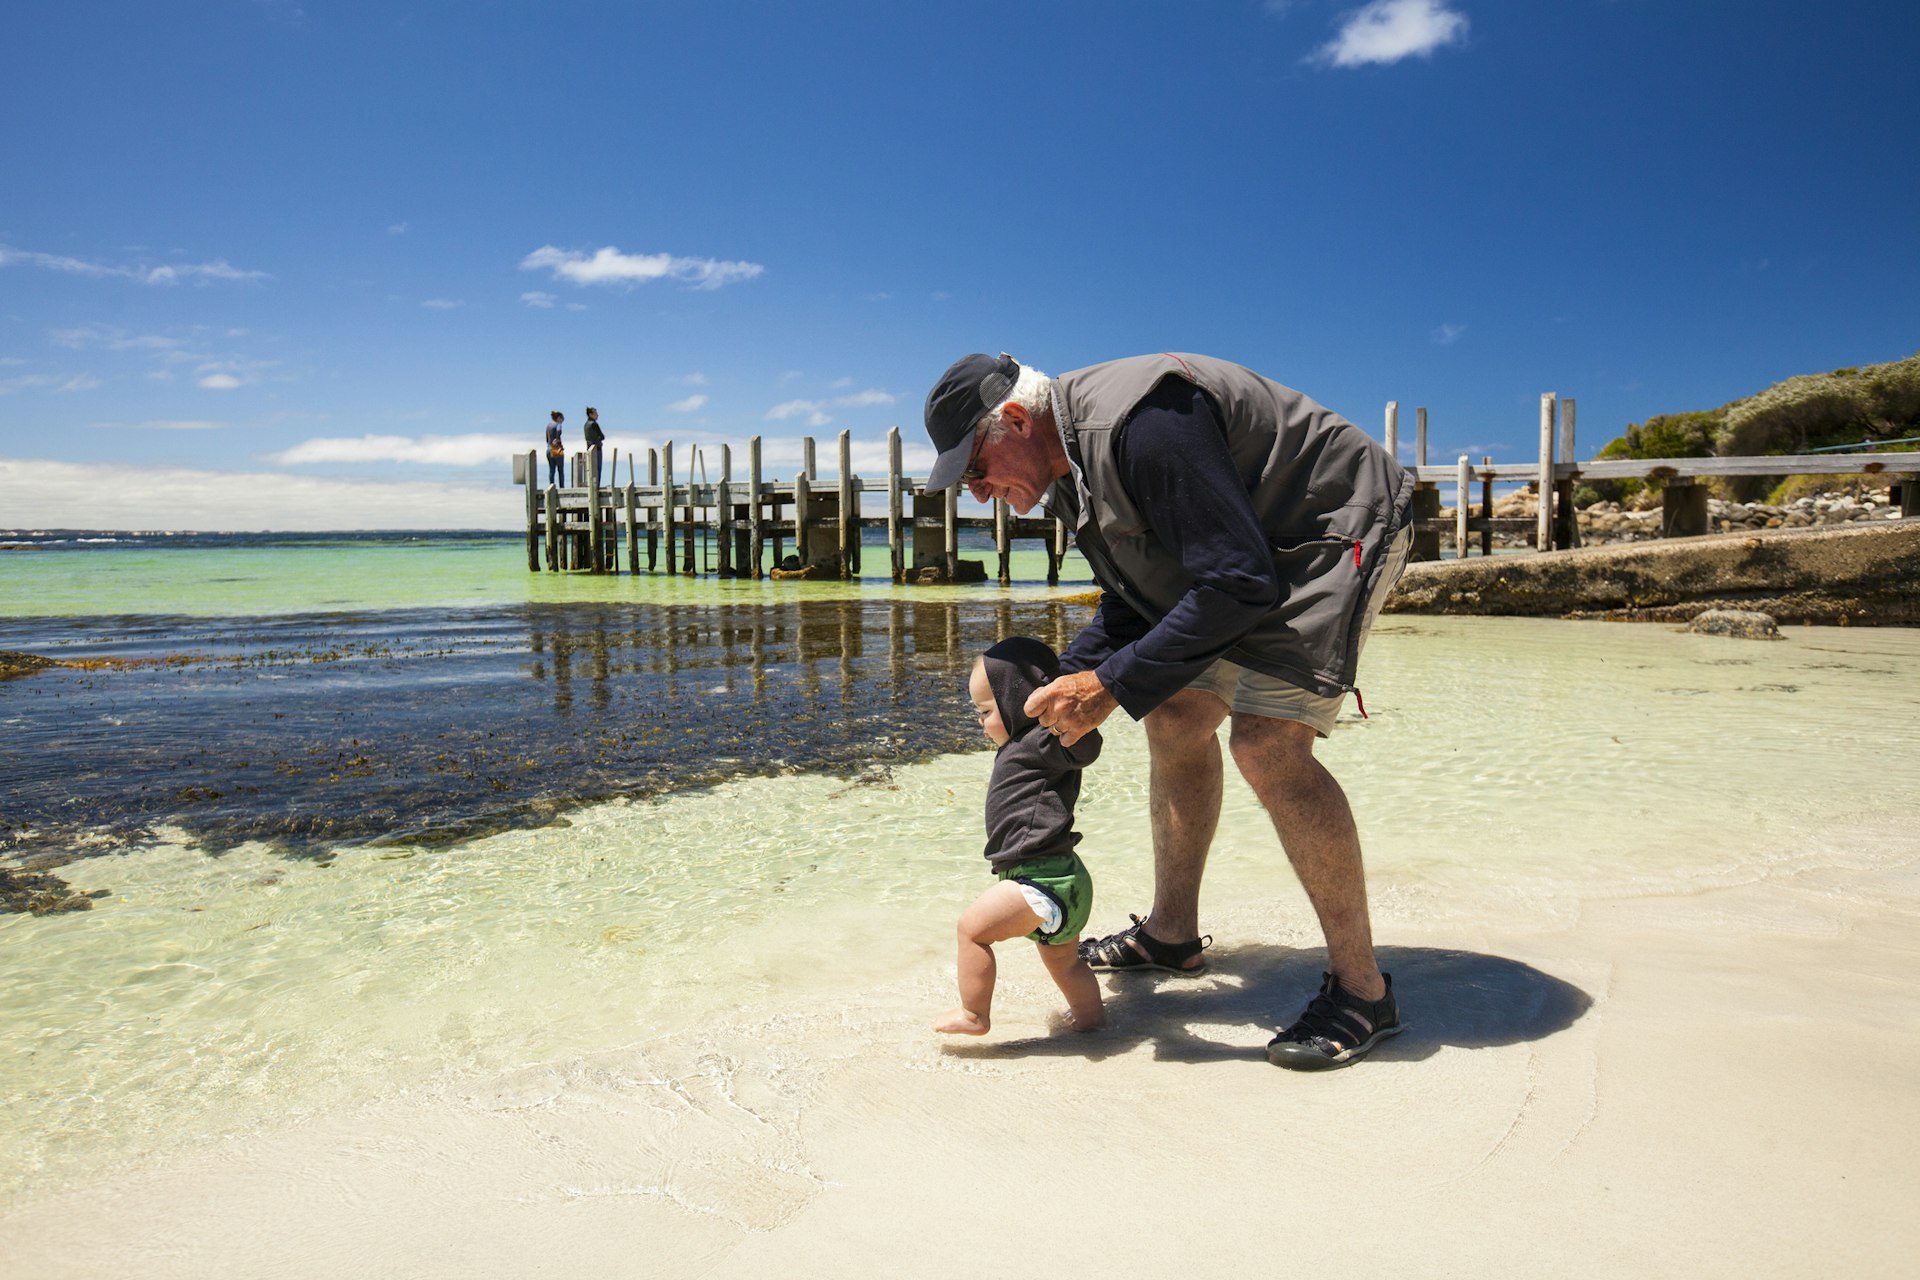 A grandad holds the hands of a toddler on the beach, who is heading straight into the ocean